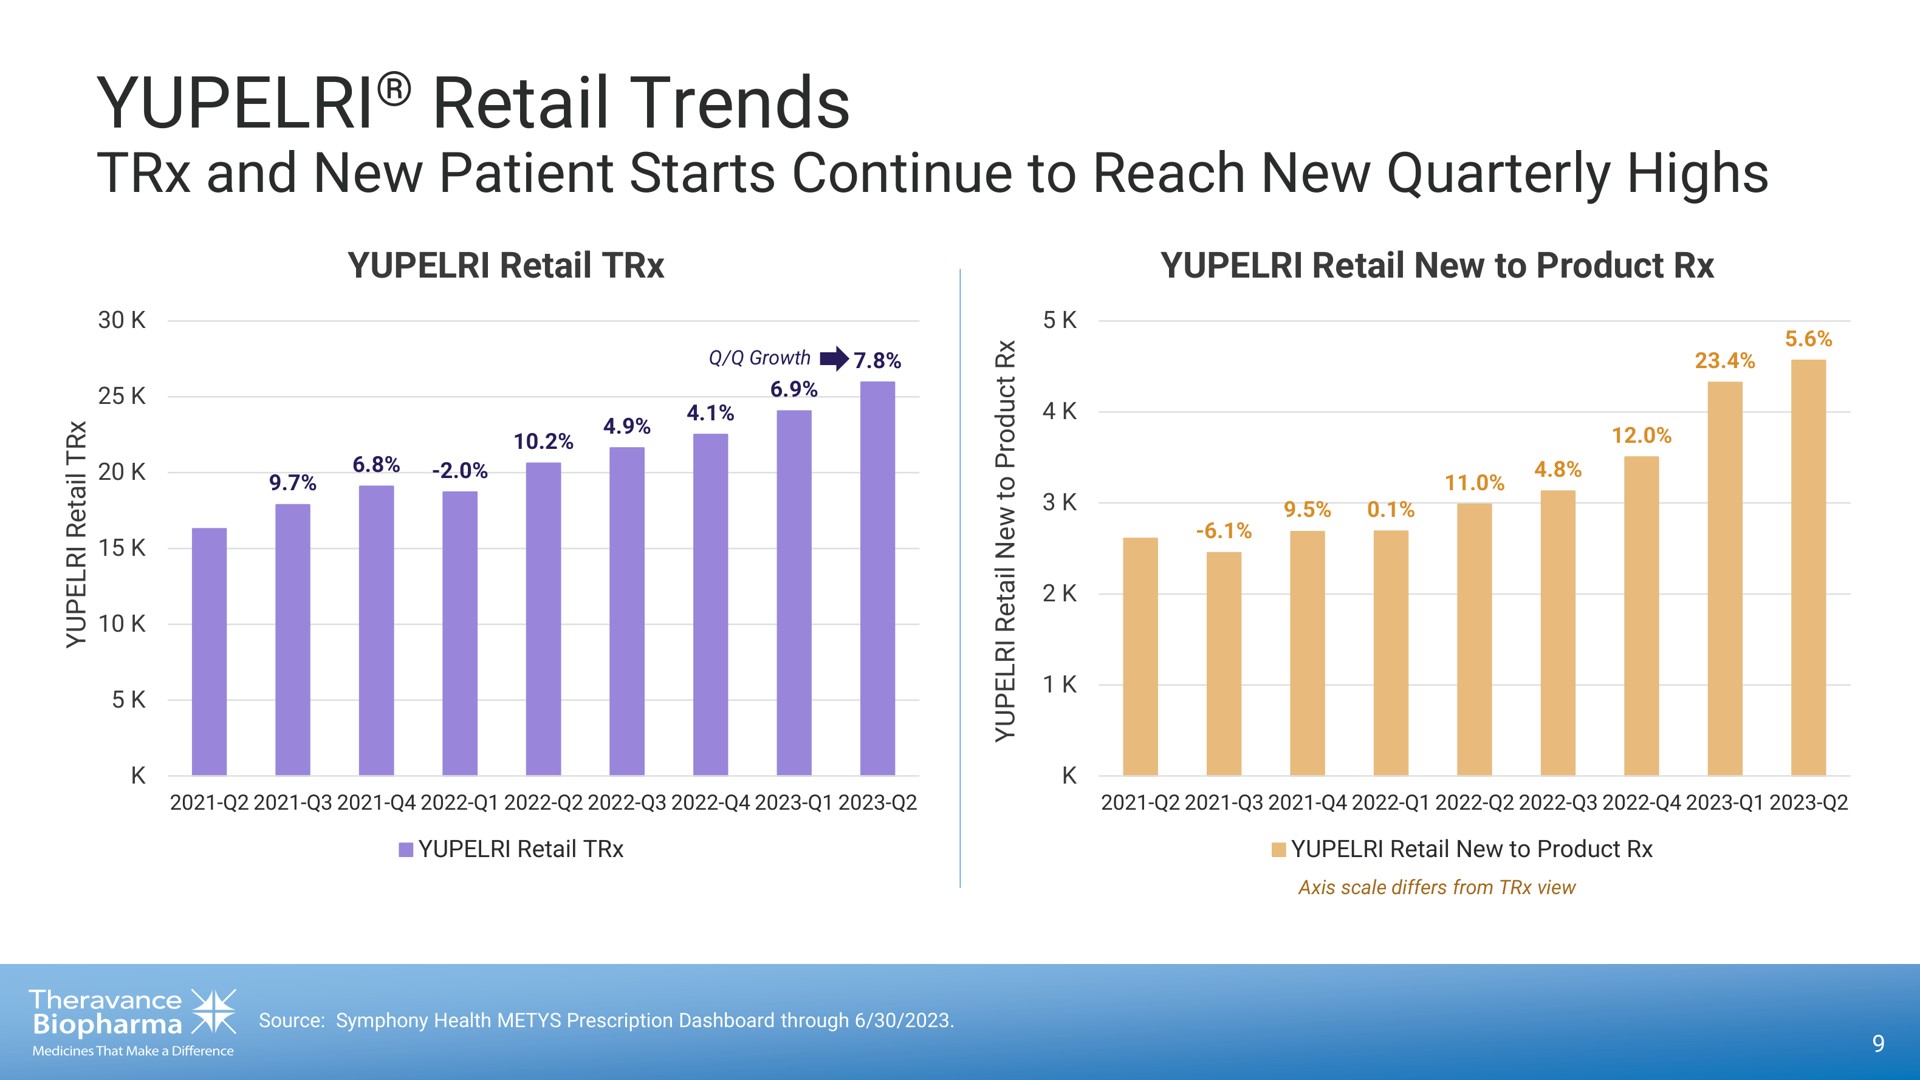 retail trends and new patient starts continue to reach new quarterly highs | Theravance Biopharma